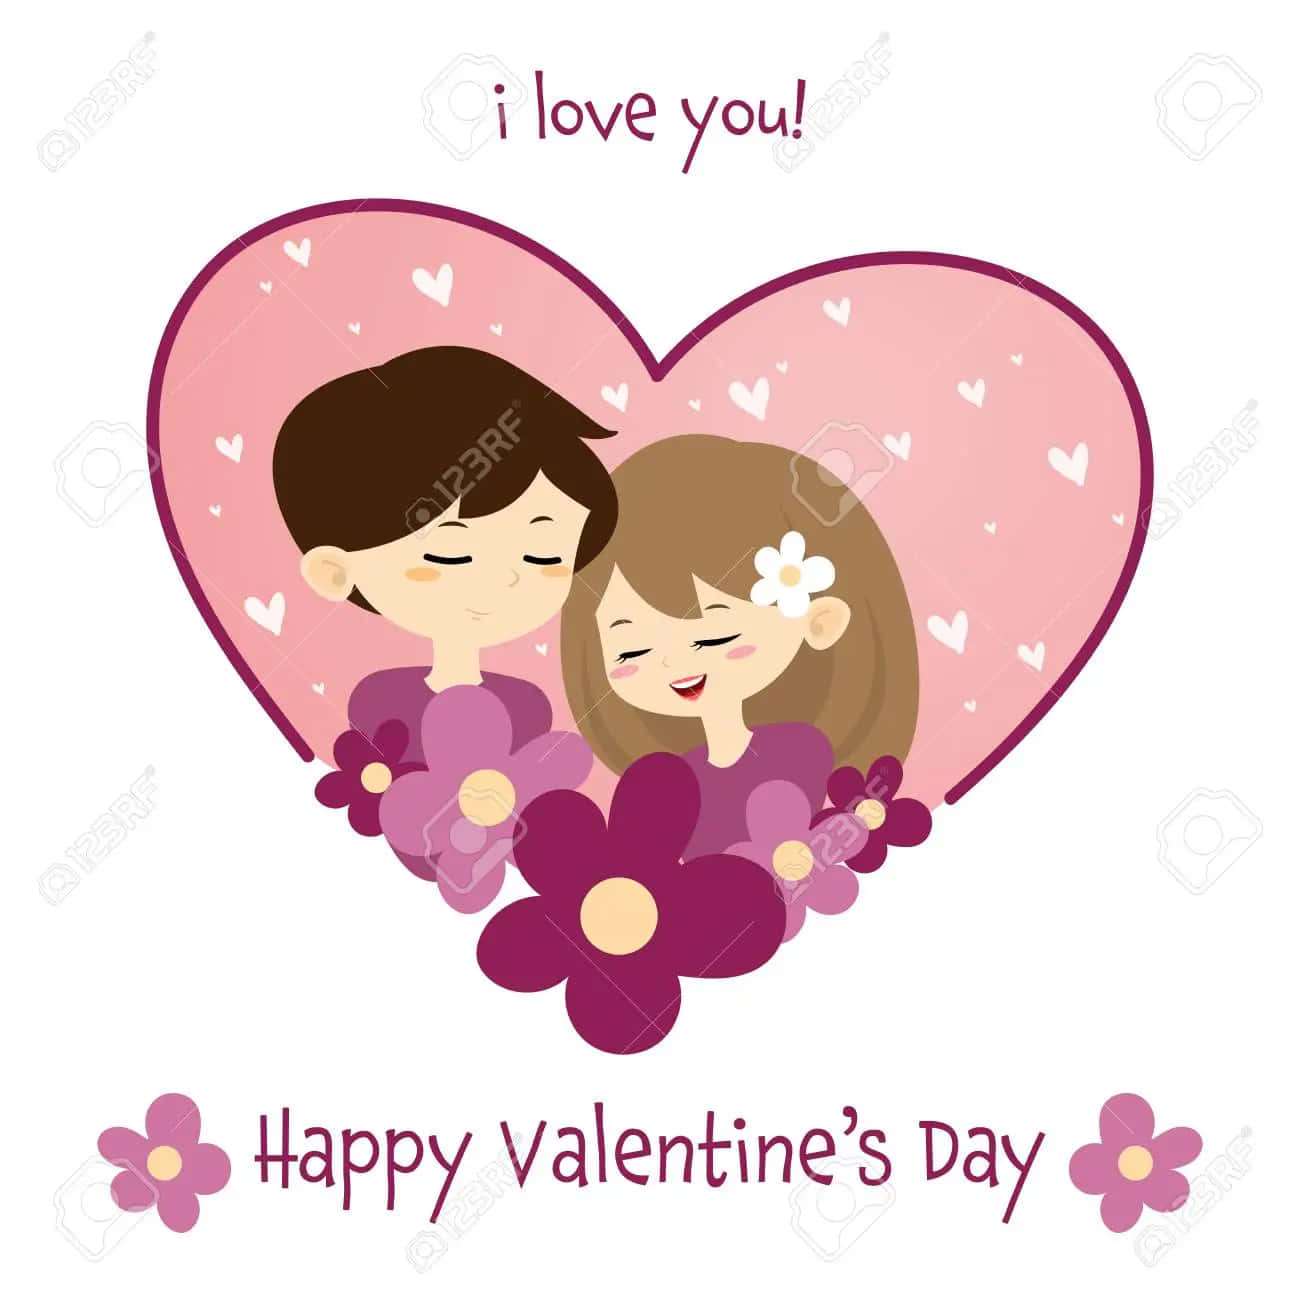 Valentine's Day Card With Couple In Heart Stock Vector Wallpaper